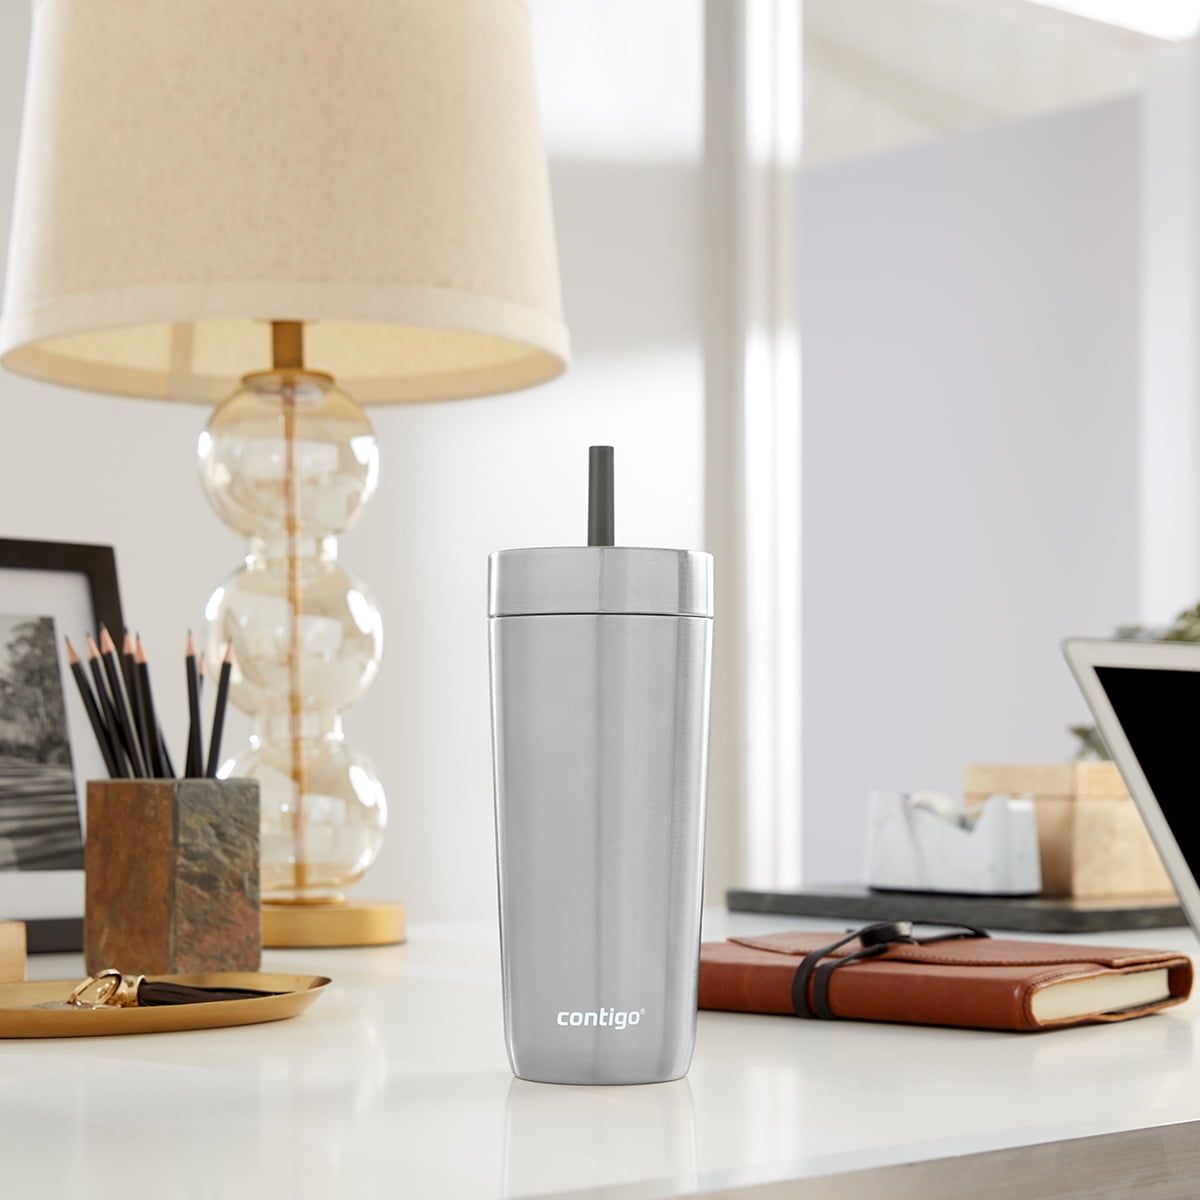 Contigo® Introduces LUXE Collection with Thermal Mug and Spill-Proof Tumbler  Launch